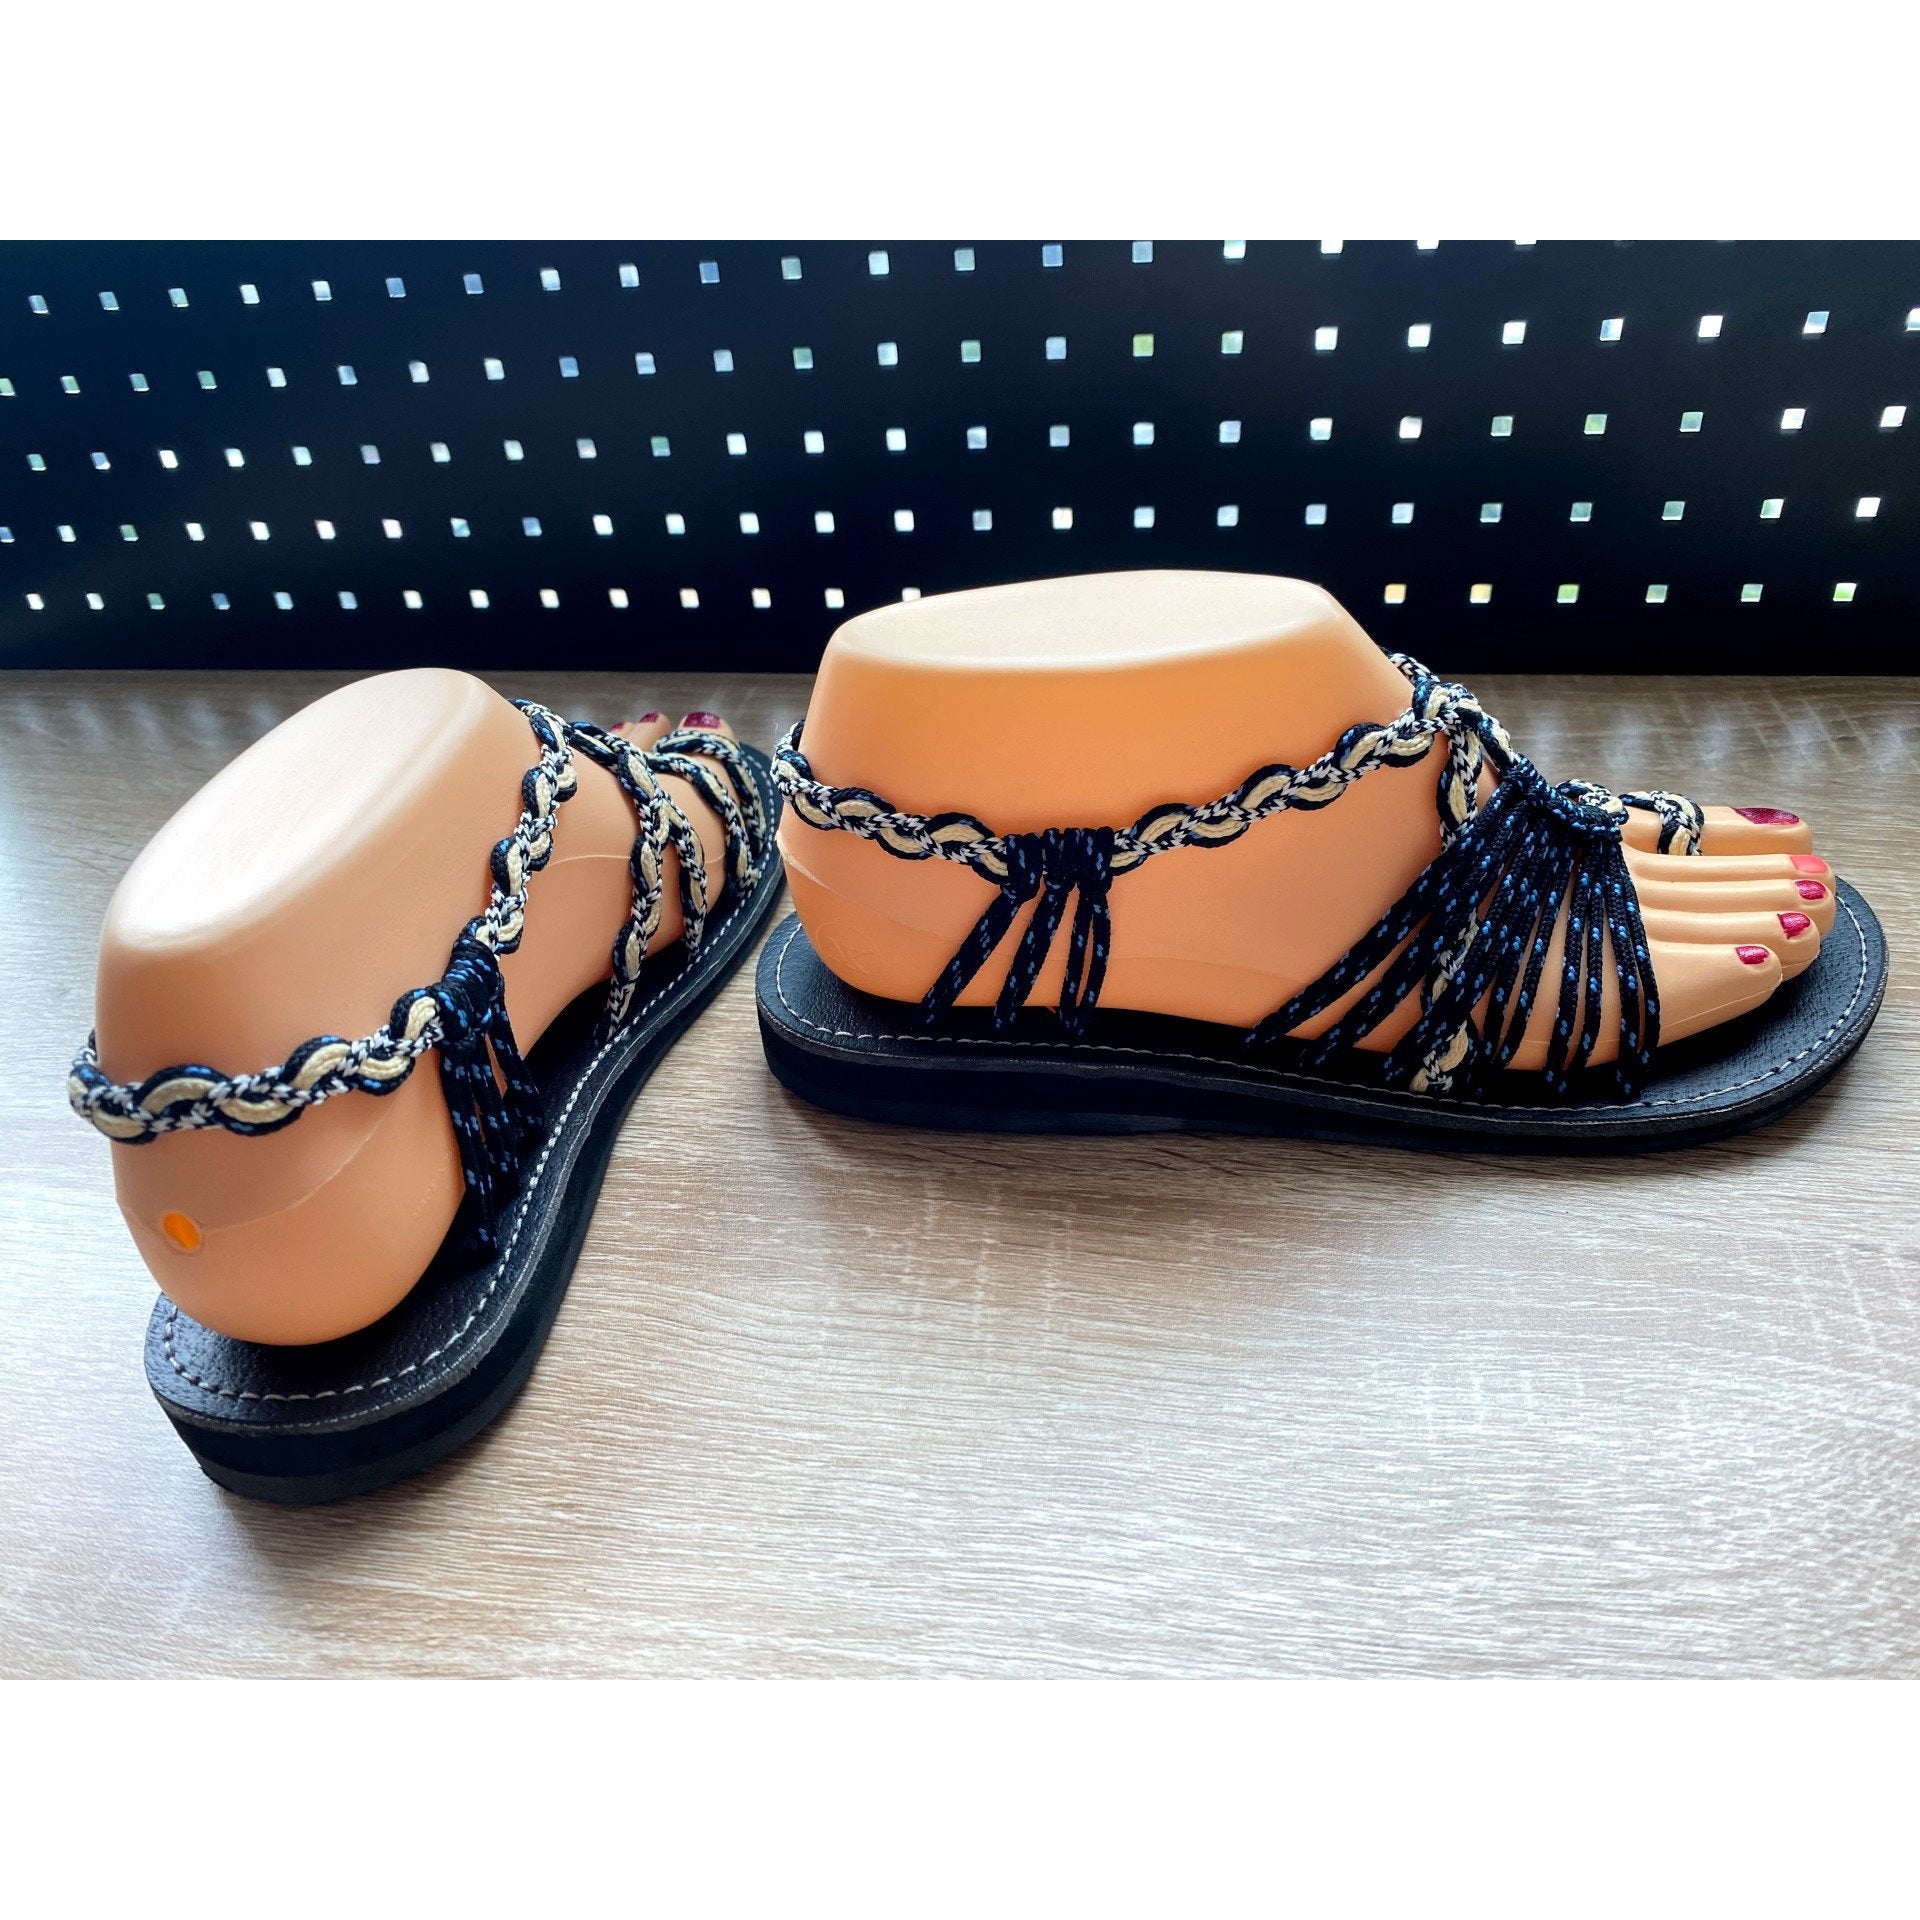 Shoes - Braided Sandals